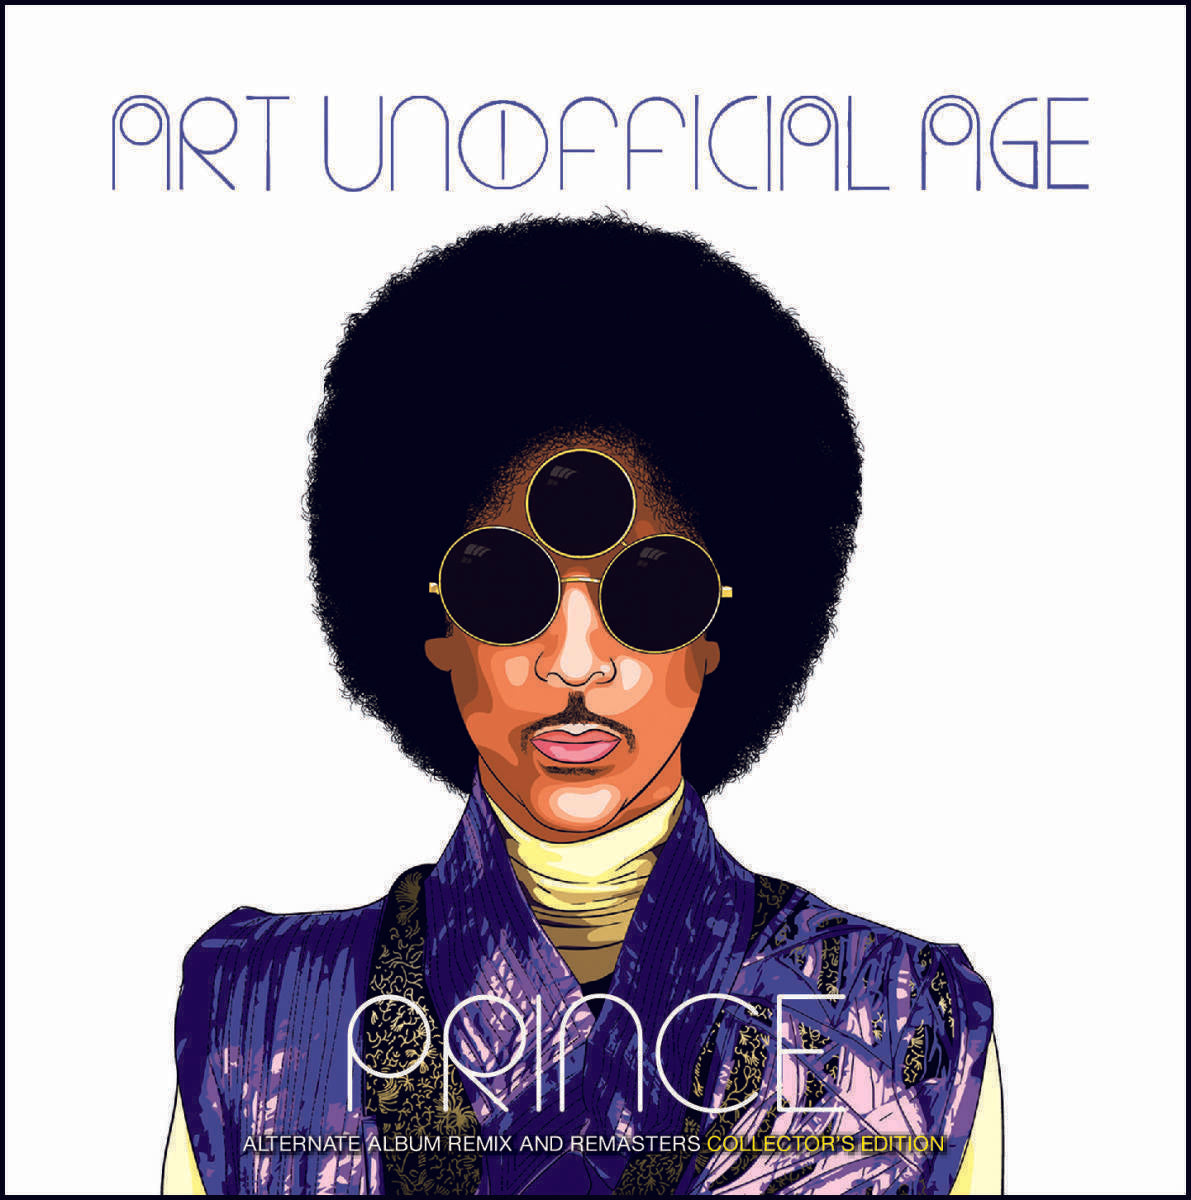 Prince Art Unofficial Age Alternate Album Remix And Remasters 2CD 